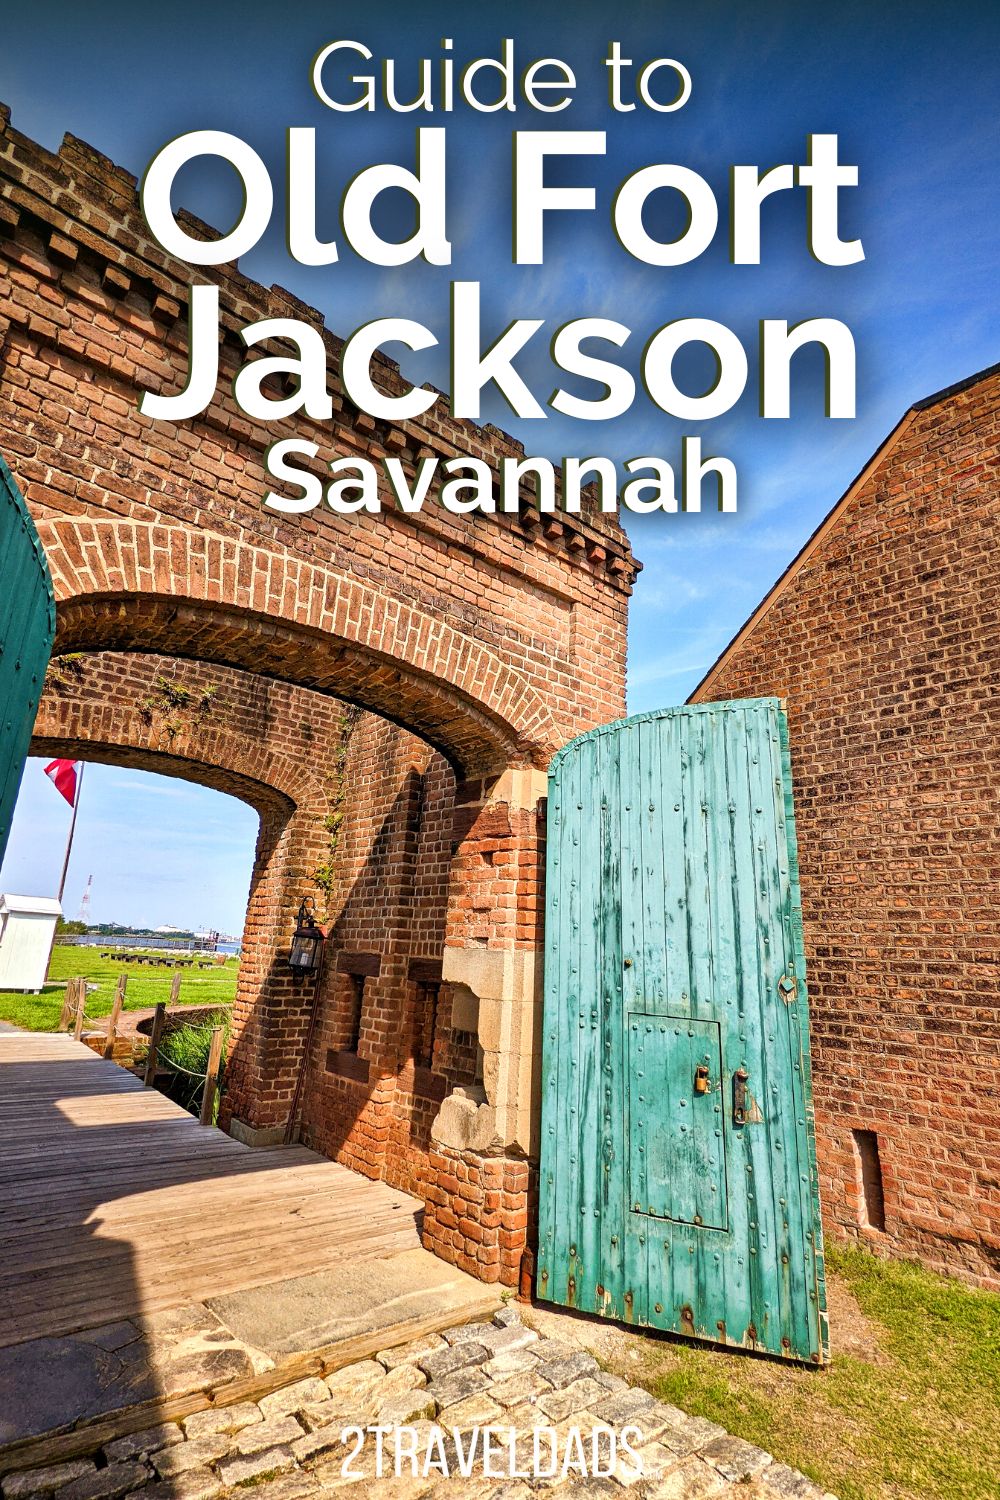 The closest Civil War fortress to Savannah, Old Fort Jackson is easy to visit when you're in Savannah. Find out what you'll see, check out the living history and get a different insight into the historic side of the area. All the need to know tips here.